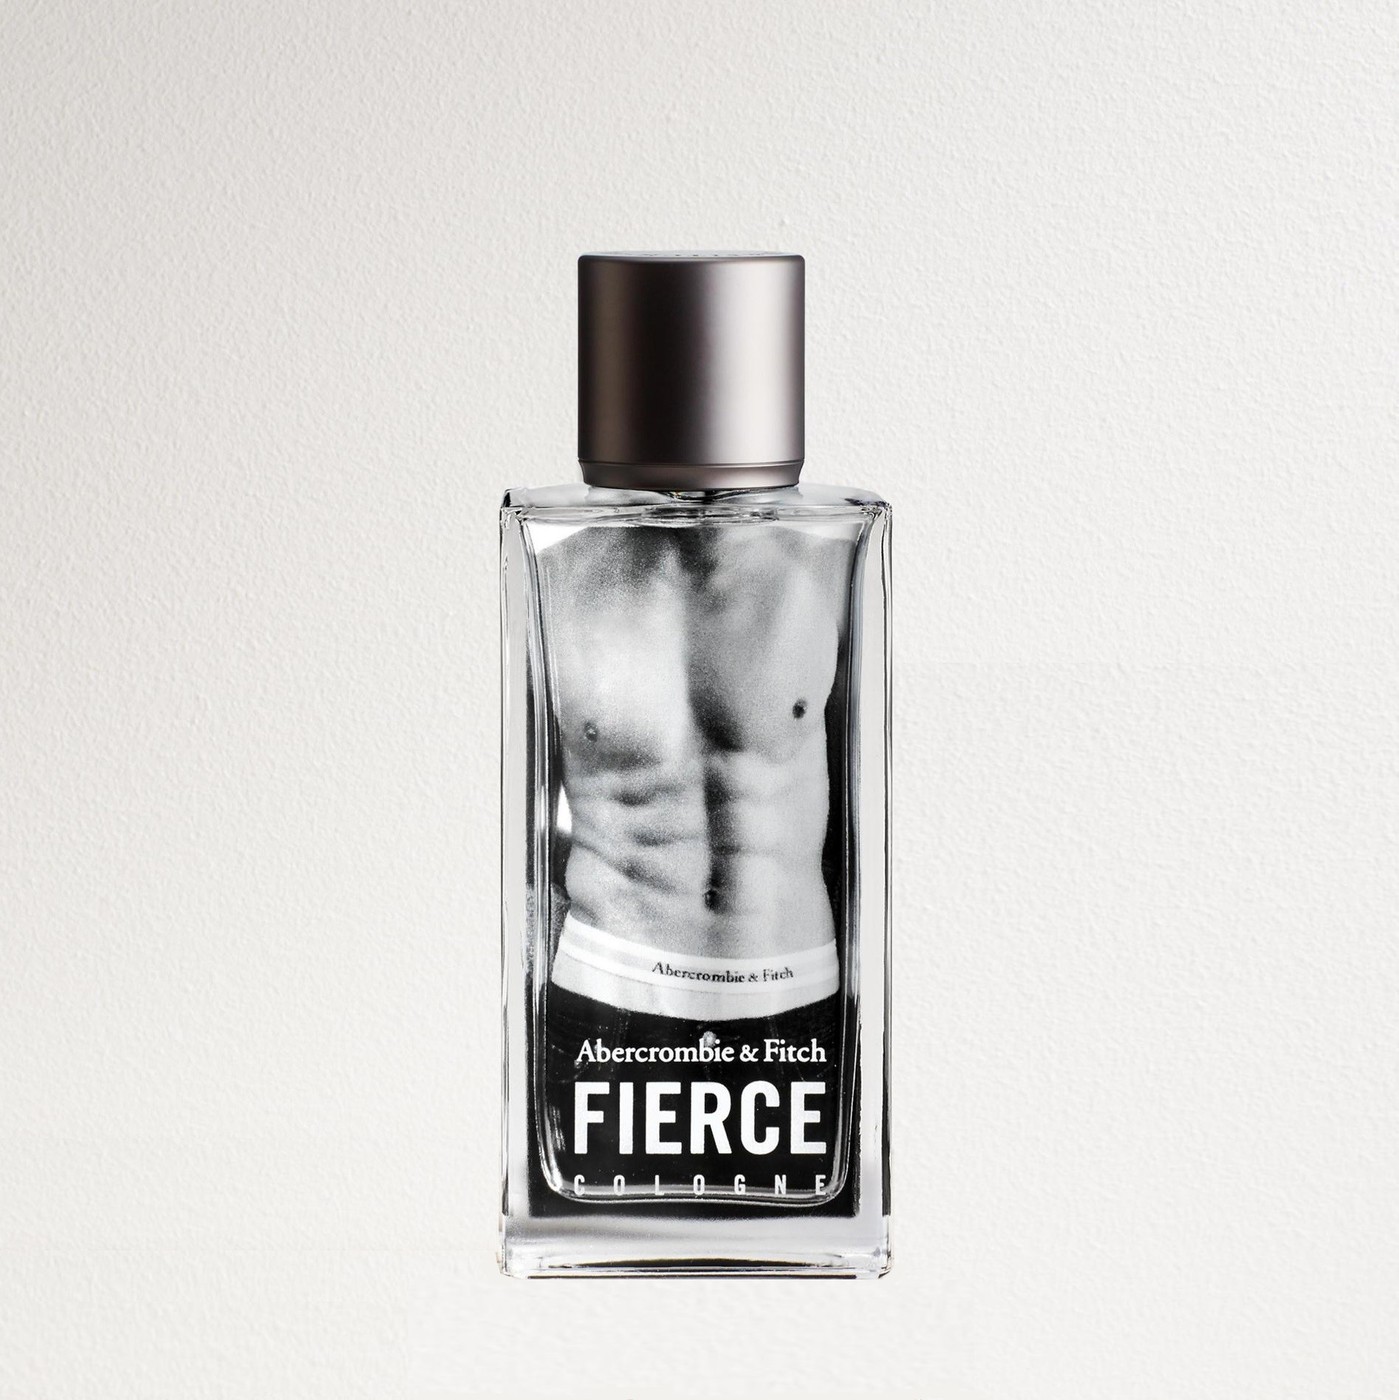 Парфюм Abercrombie & Fitch Fierce Cologne 100 мл